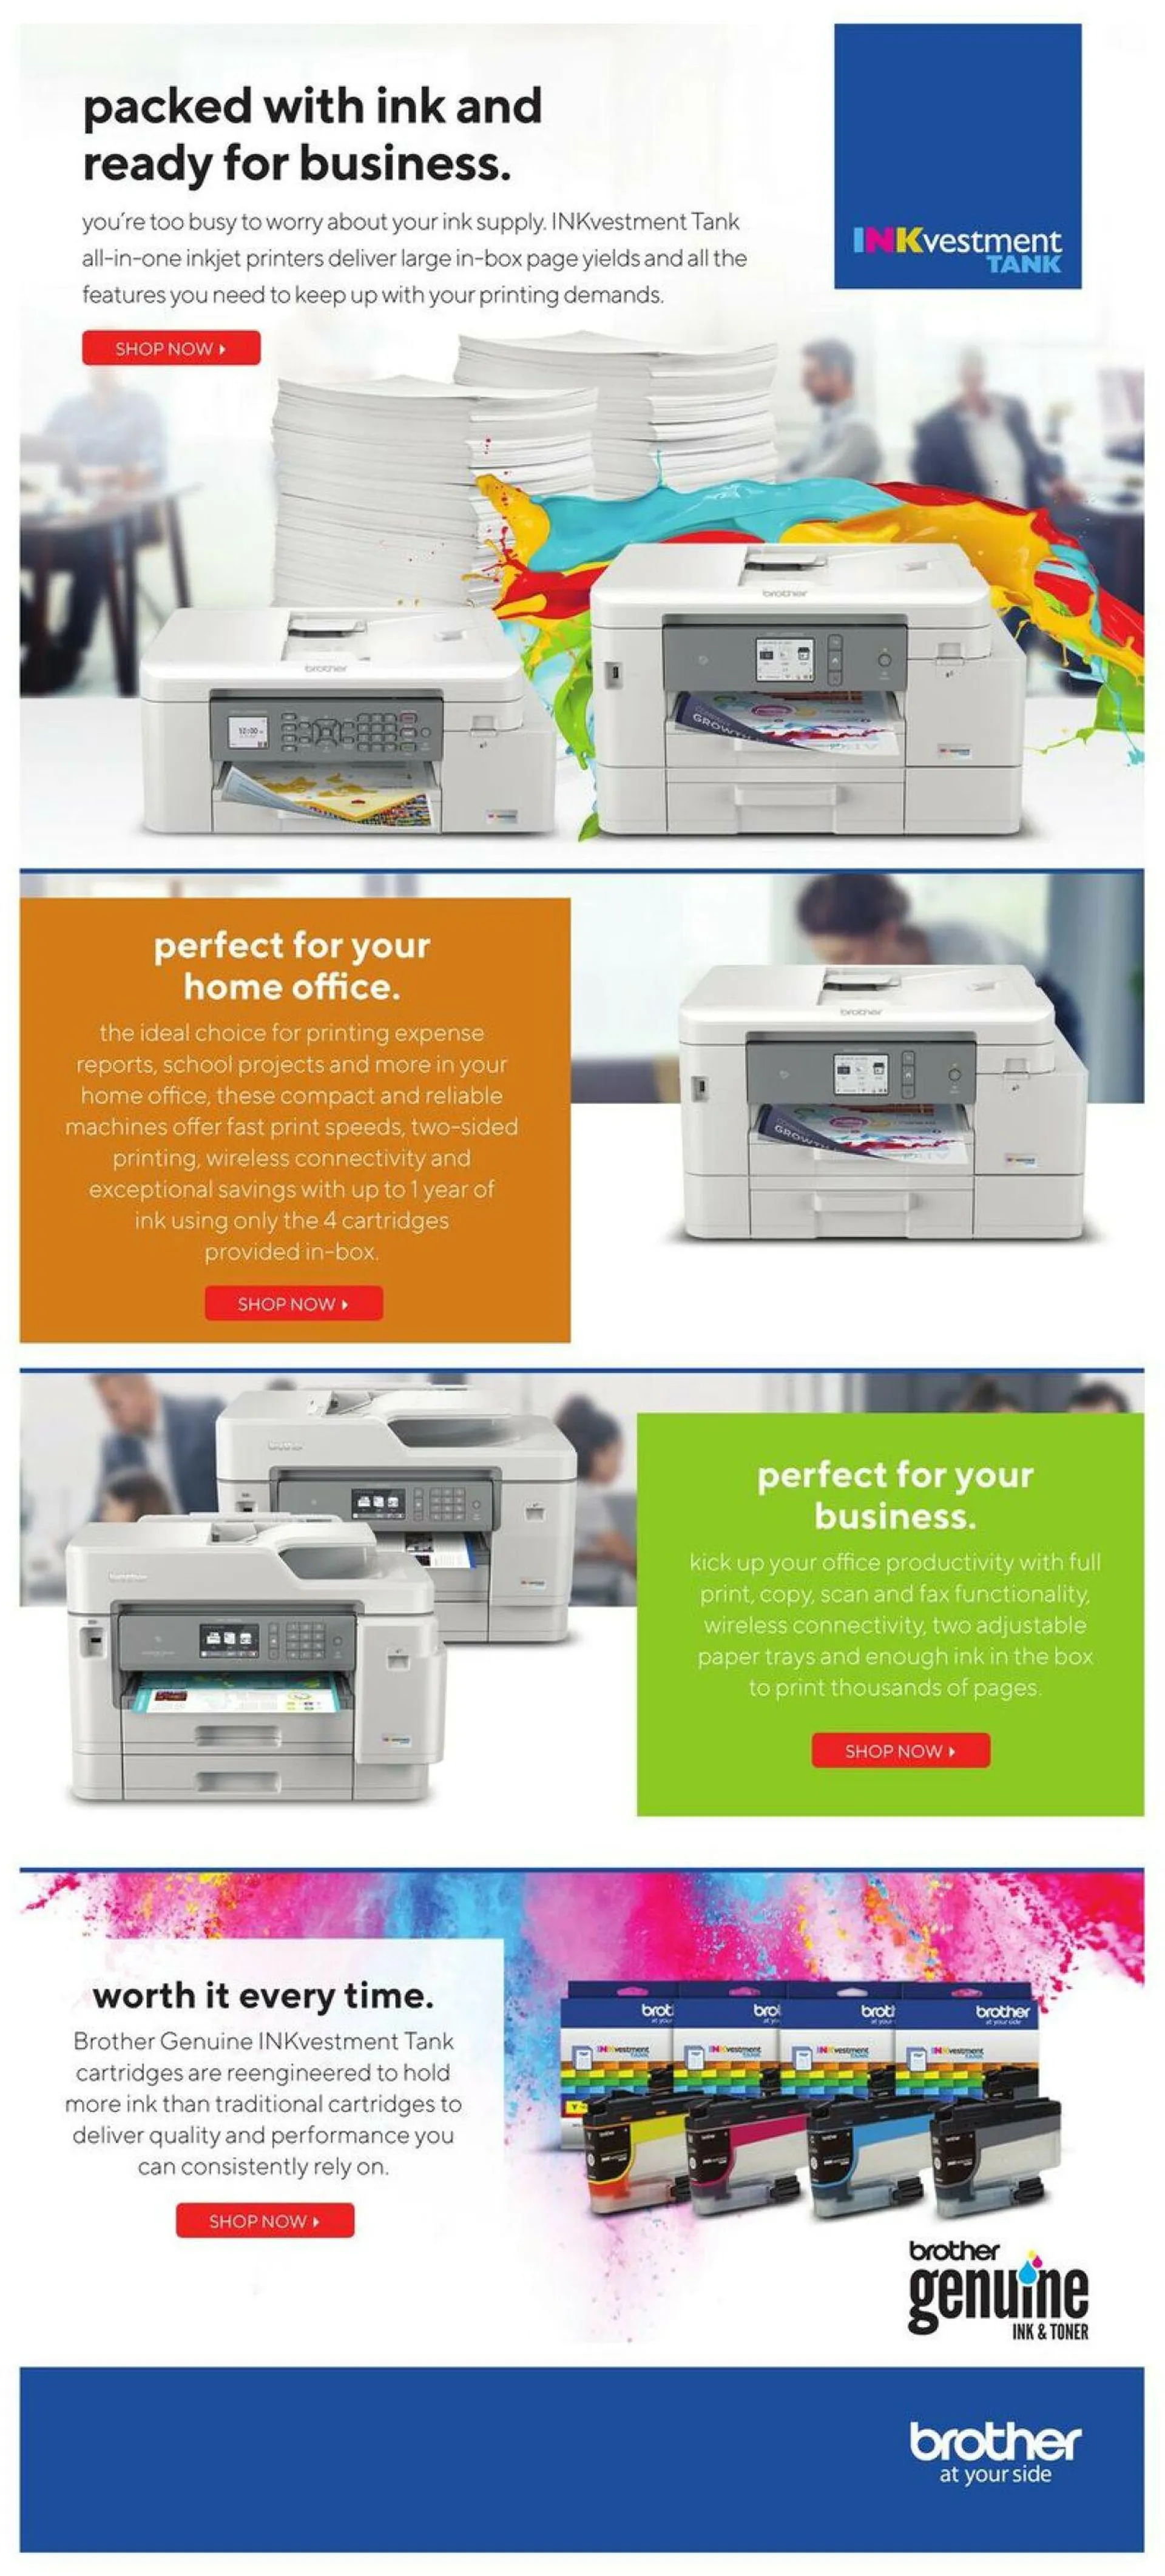 Staples Current flyer - 15